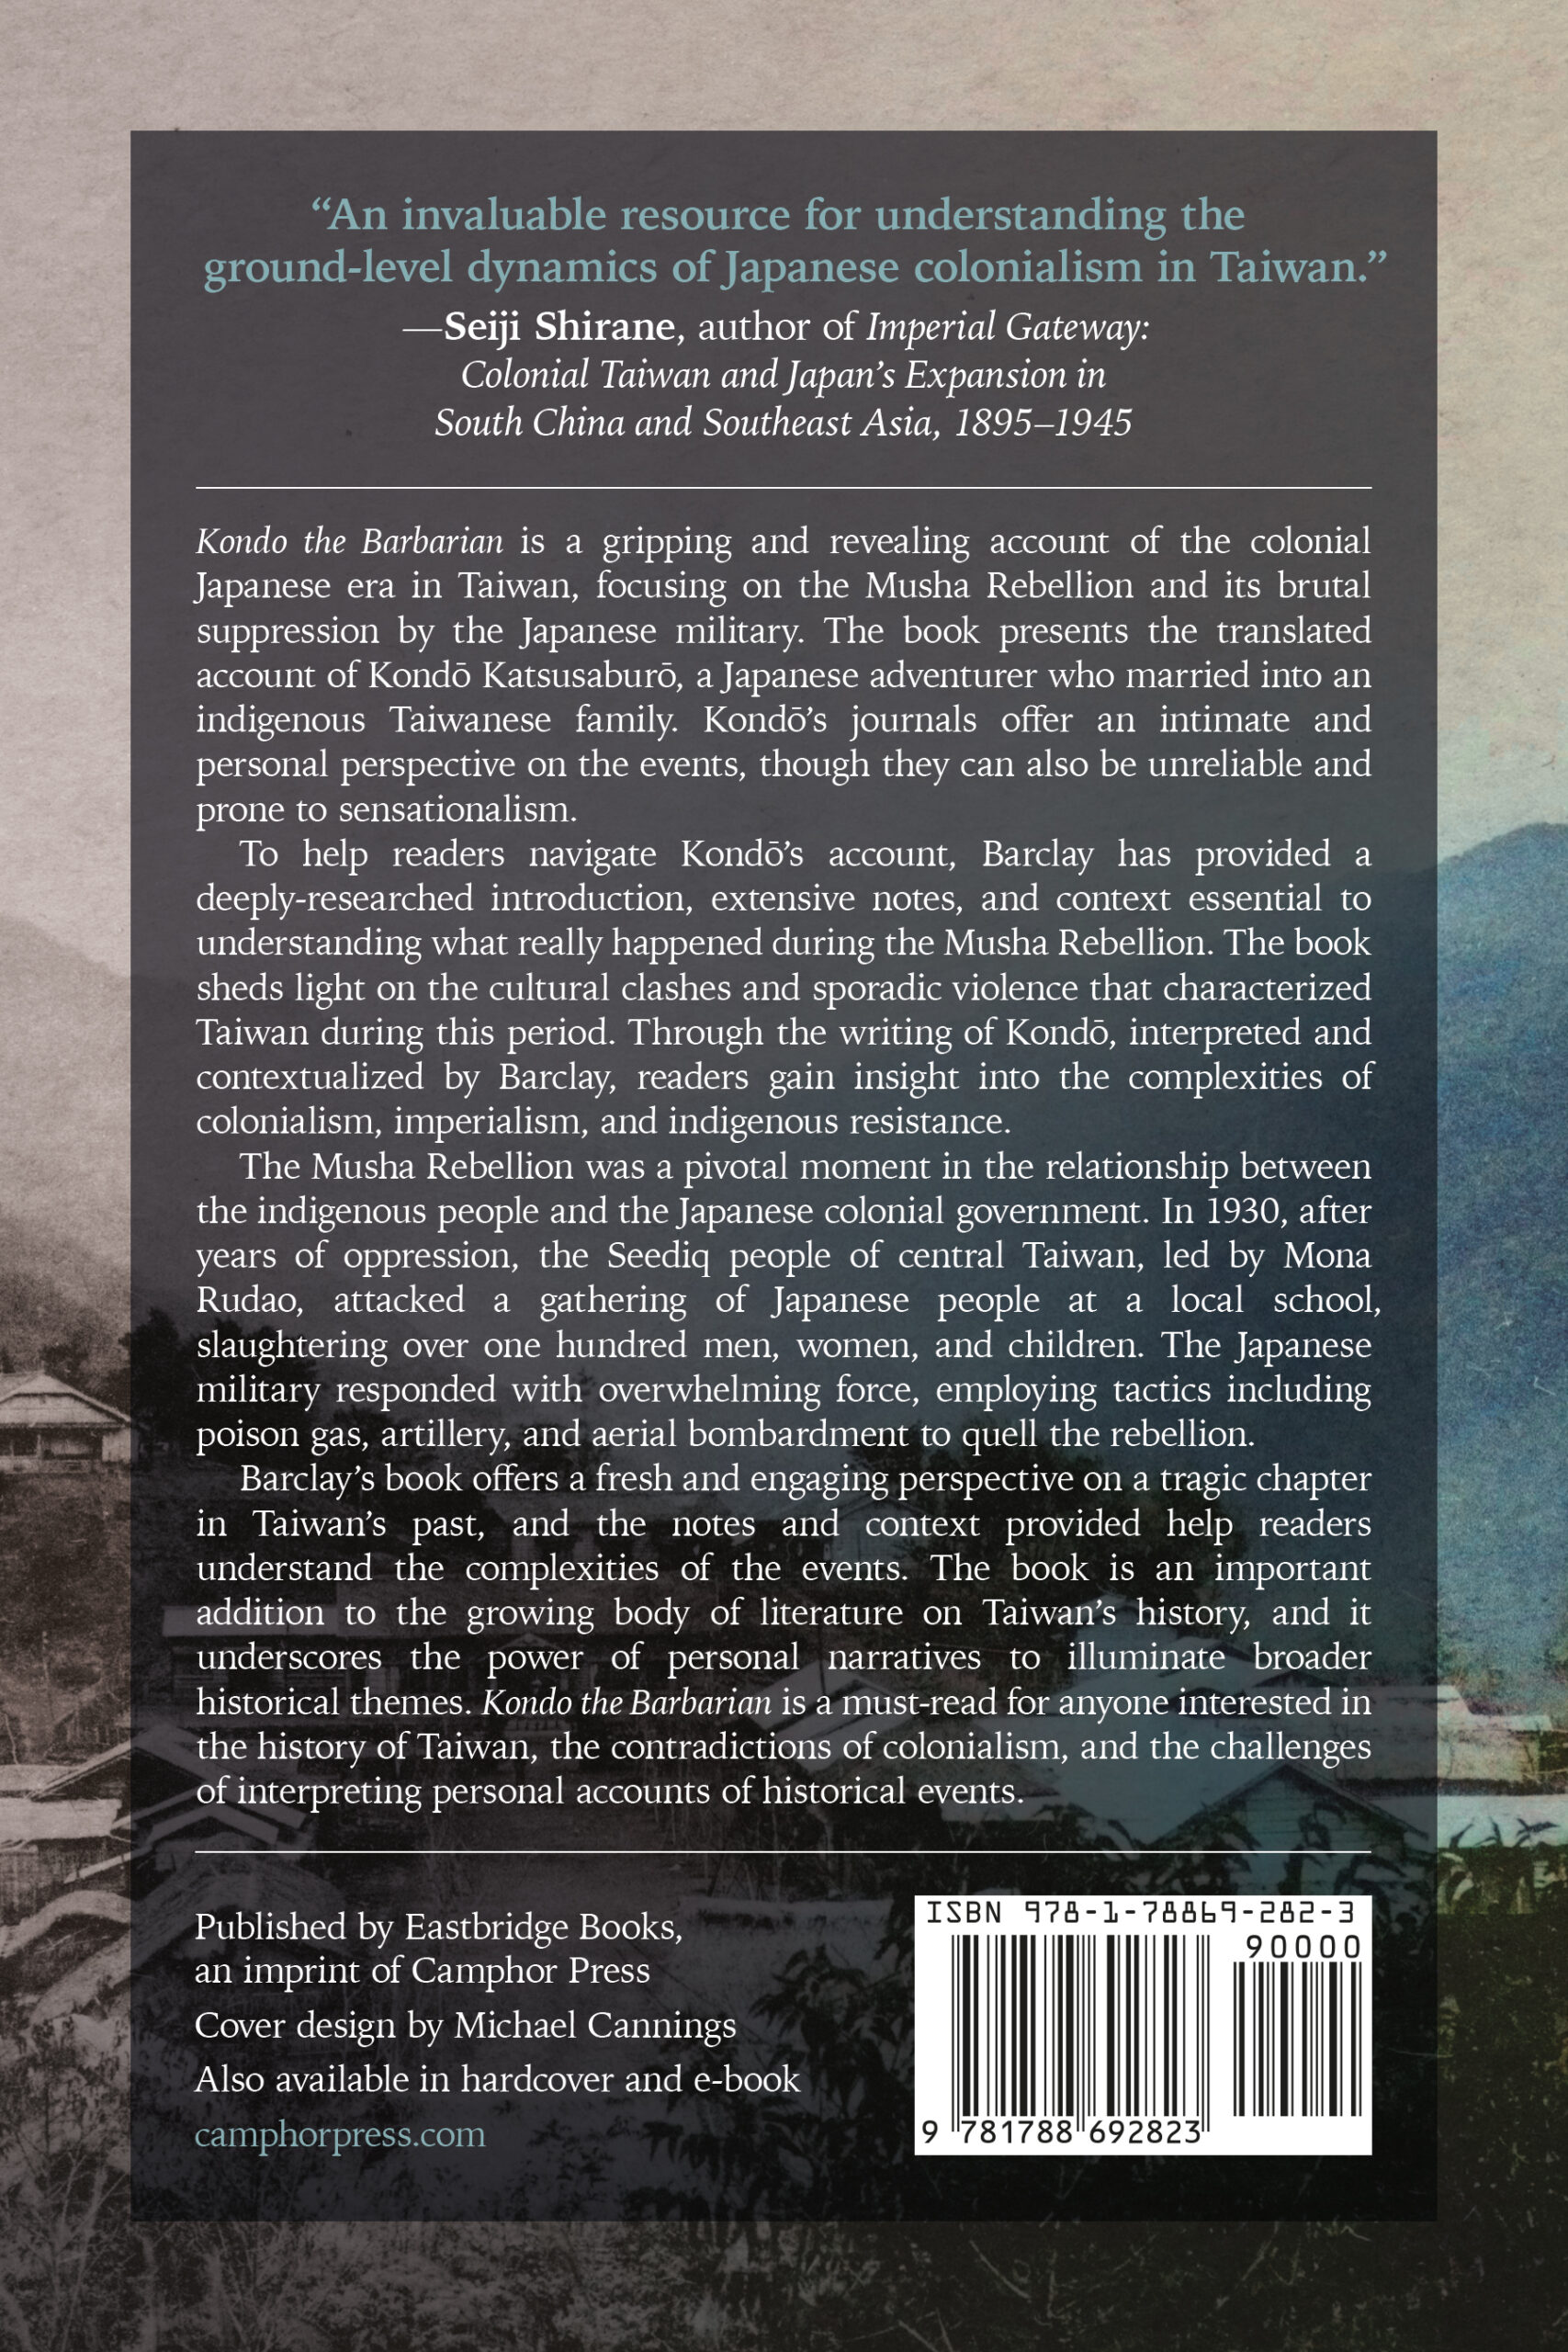 The back cover of the paperback edition of Kondo the Barbarian, by Paul D. Barclay